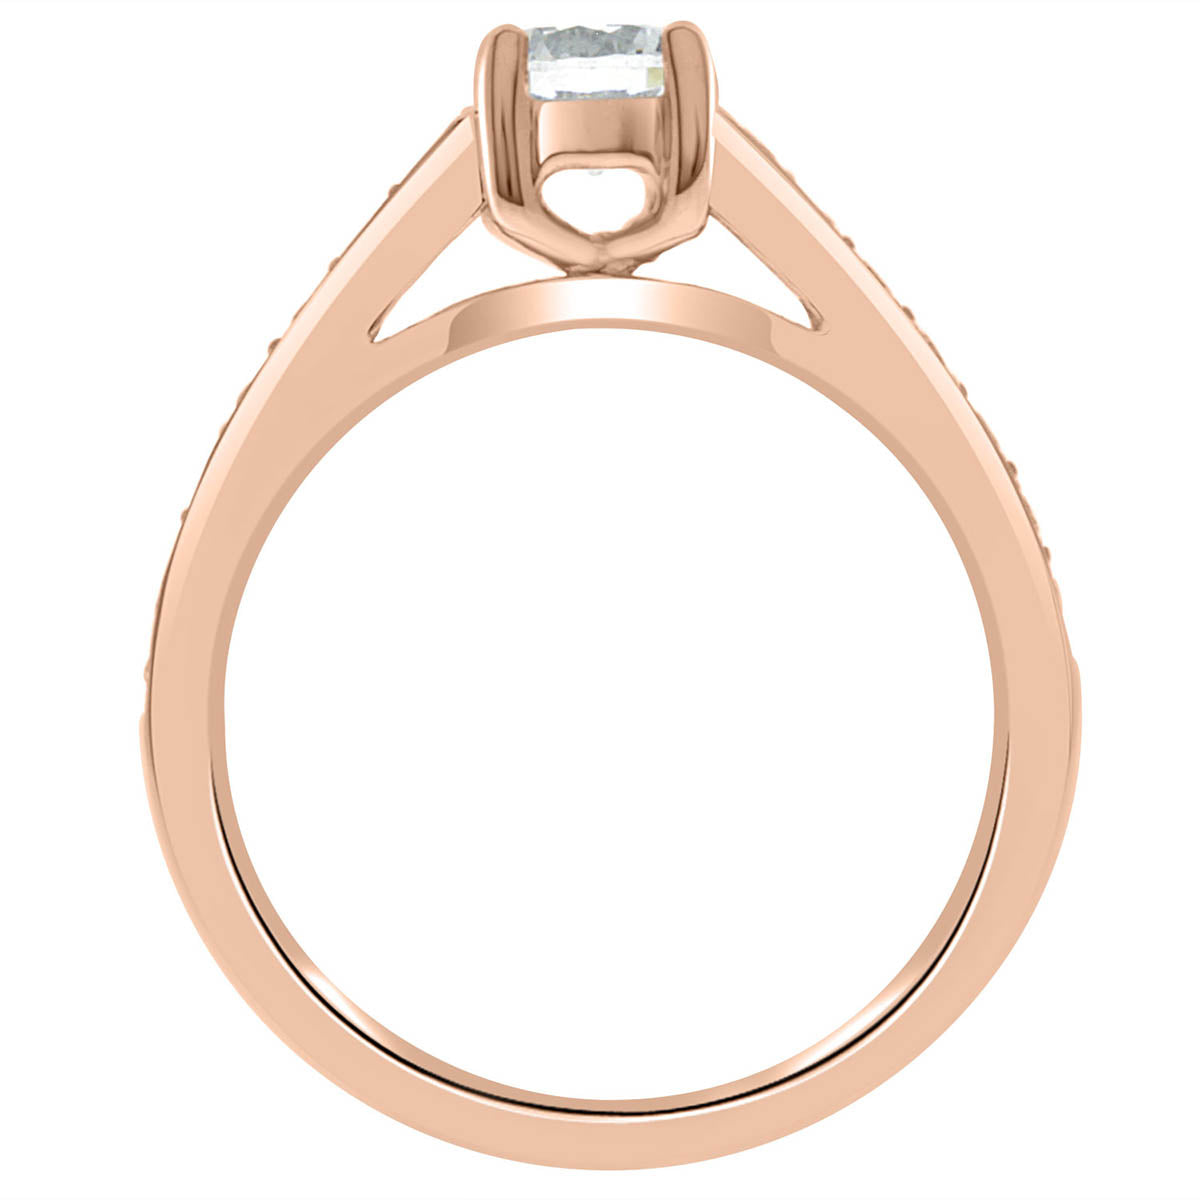 Princess Cut Bezel Ring set in rose gold and standing upright